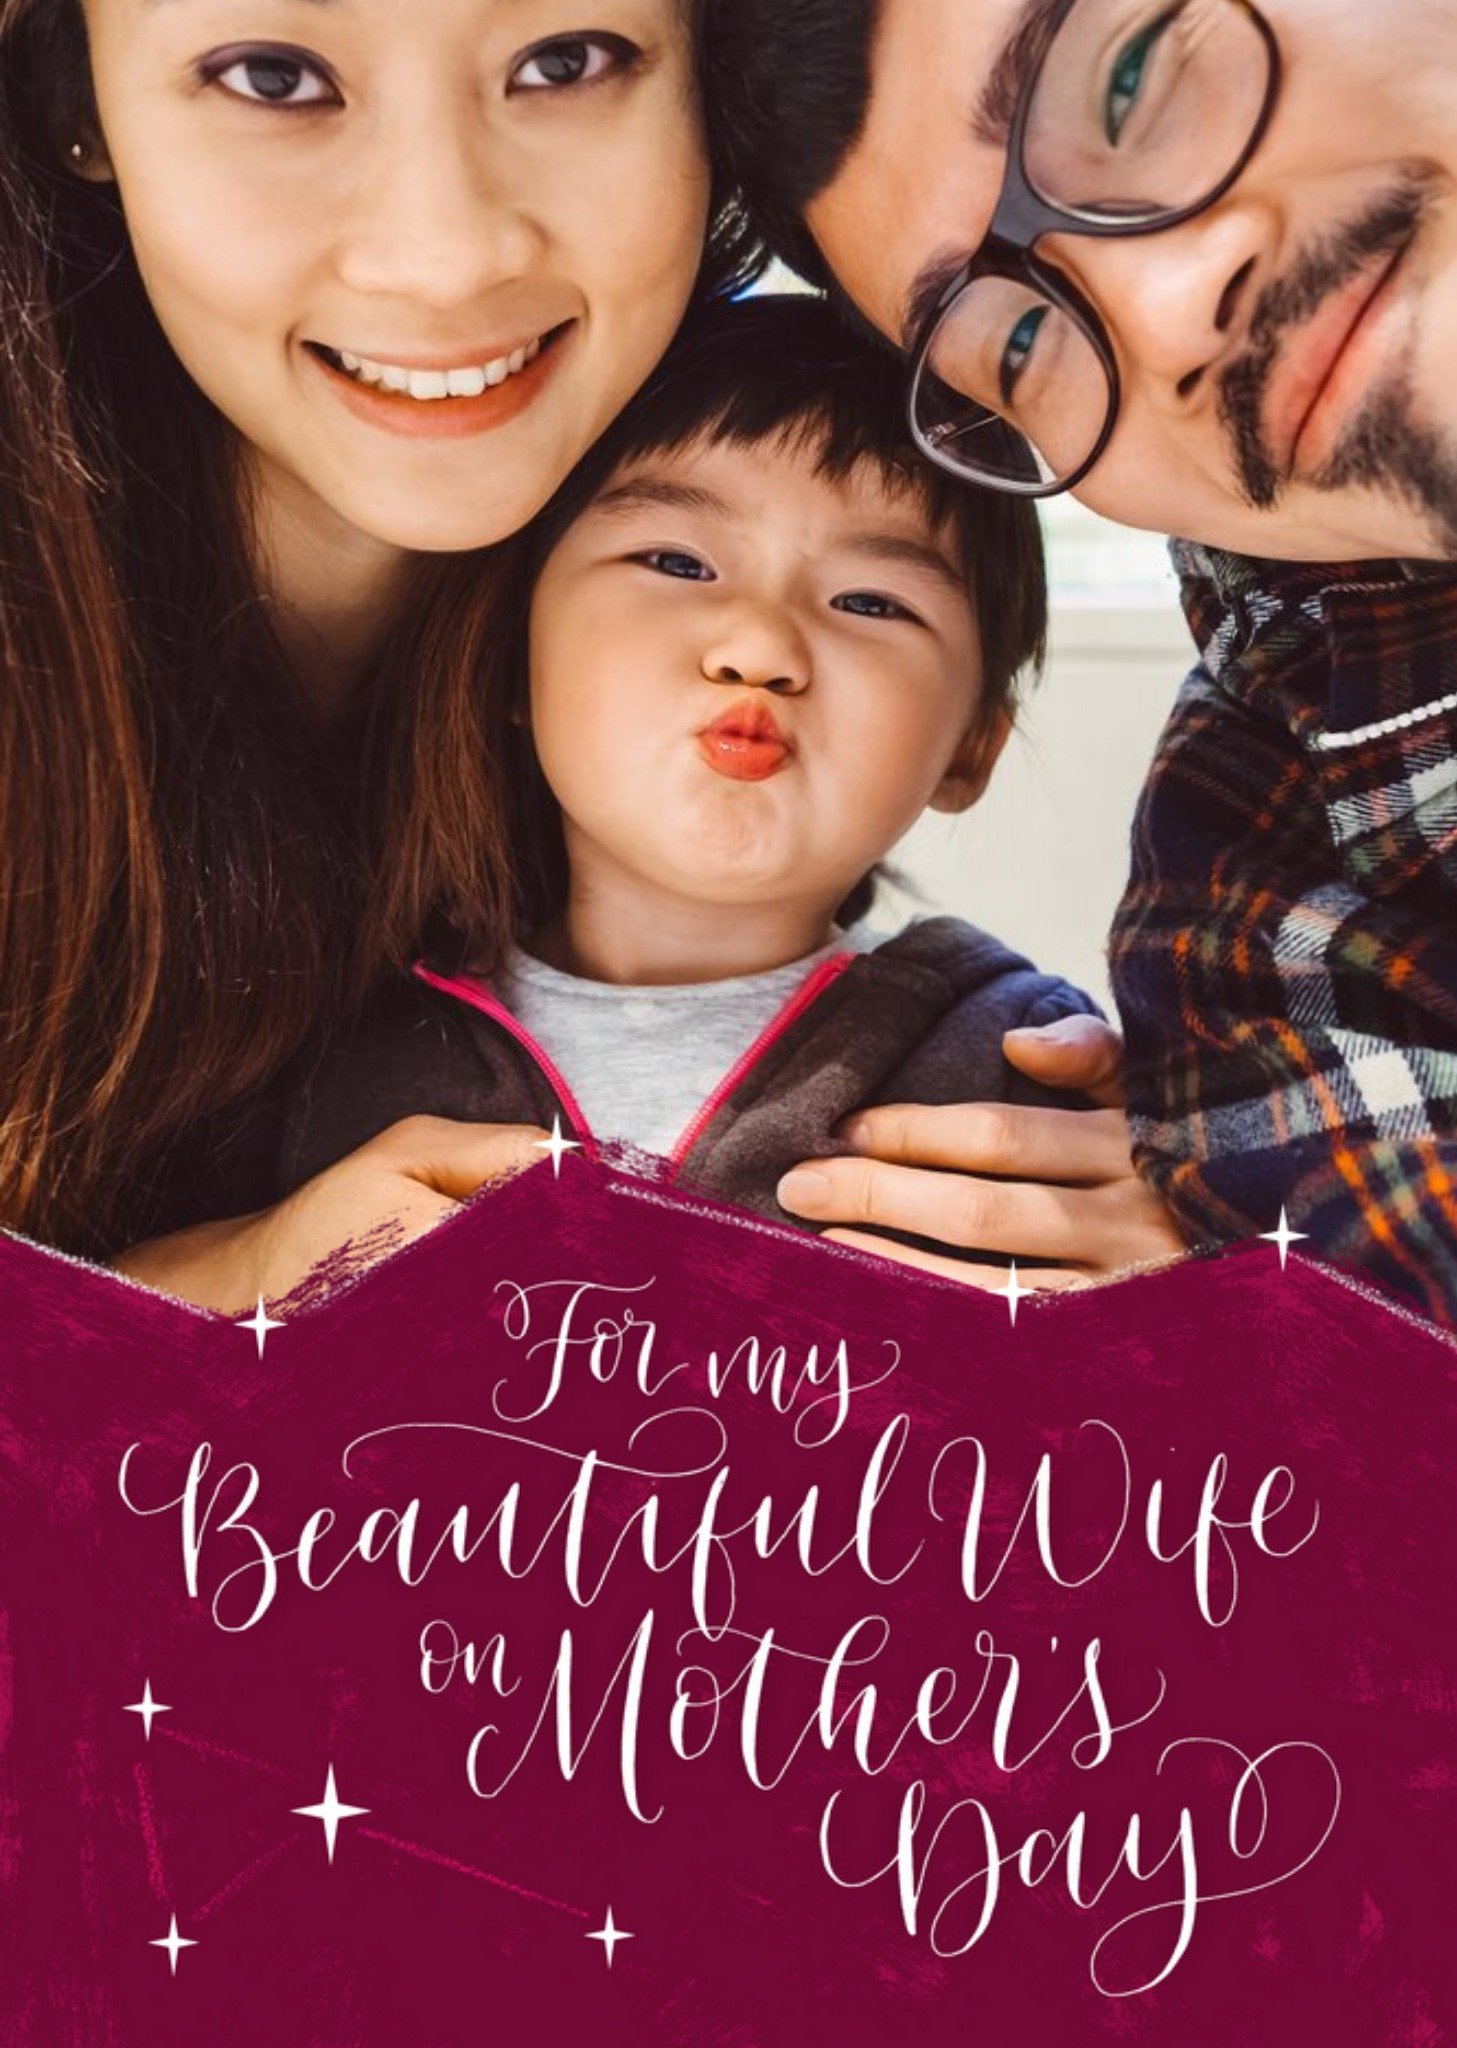 Moonpig Mother's Day Card - Beautiful Wife On Mother's Day - Photo Upload Card - Calligraphy Ecard